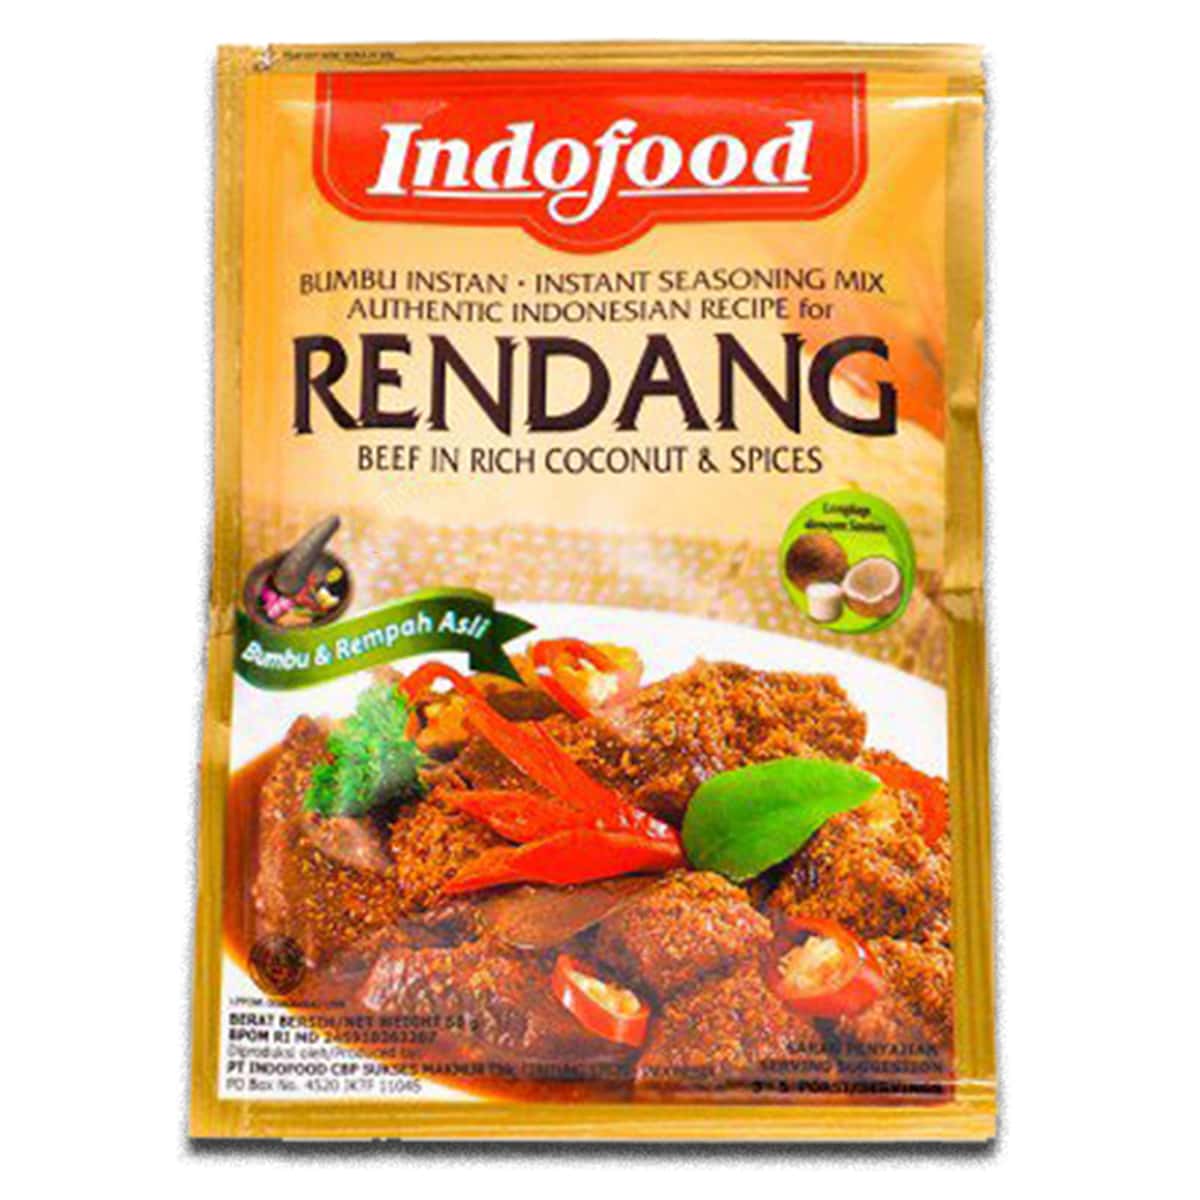 Buy Indofood Rendang (Beef in Rich Coconut and Spices) - 50 gm